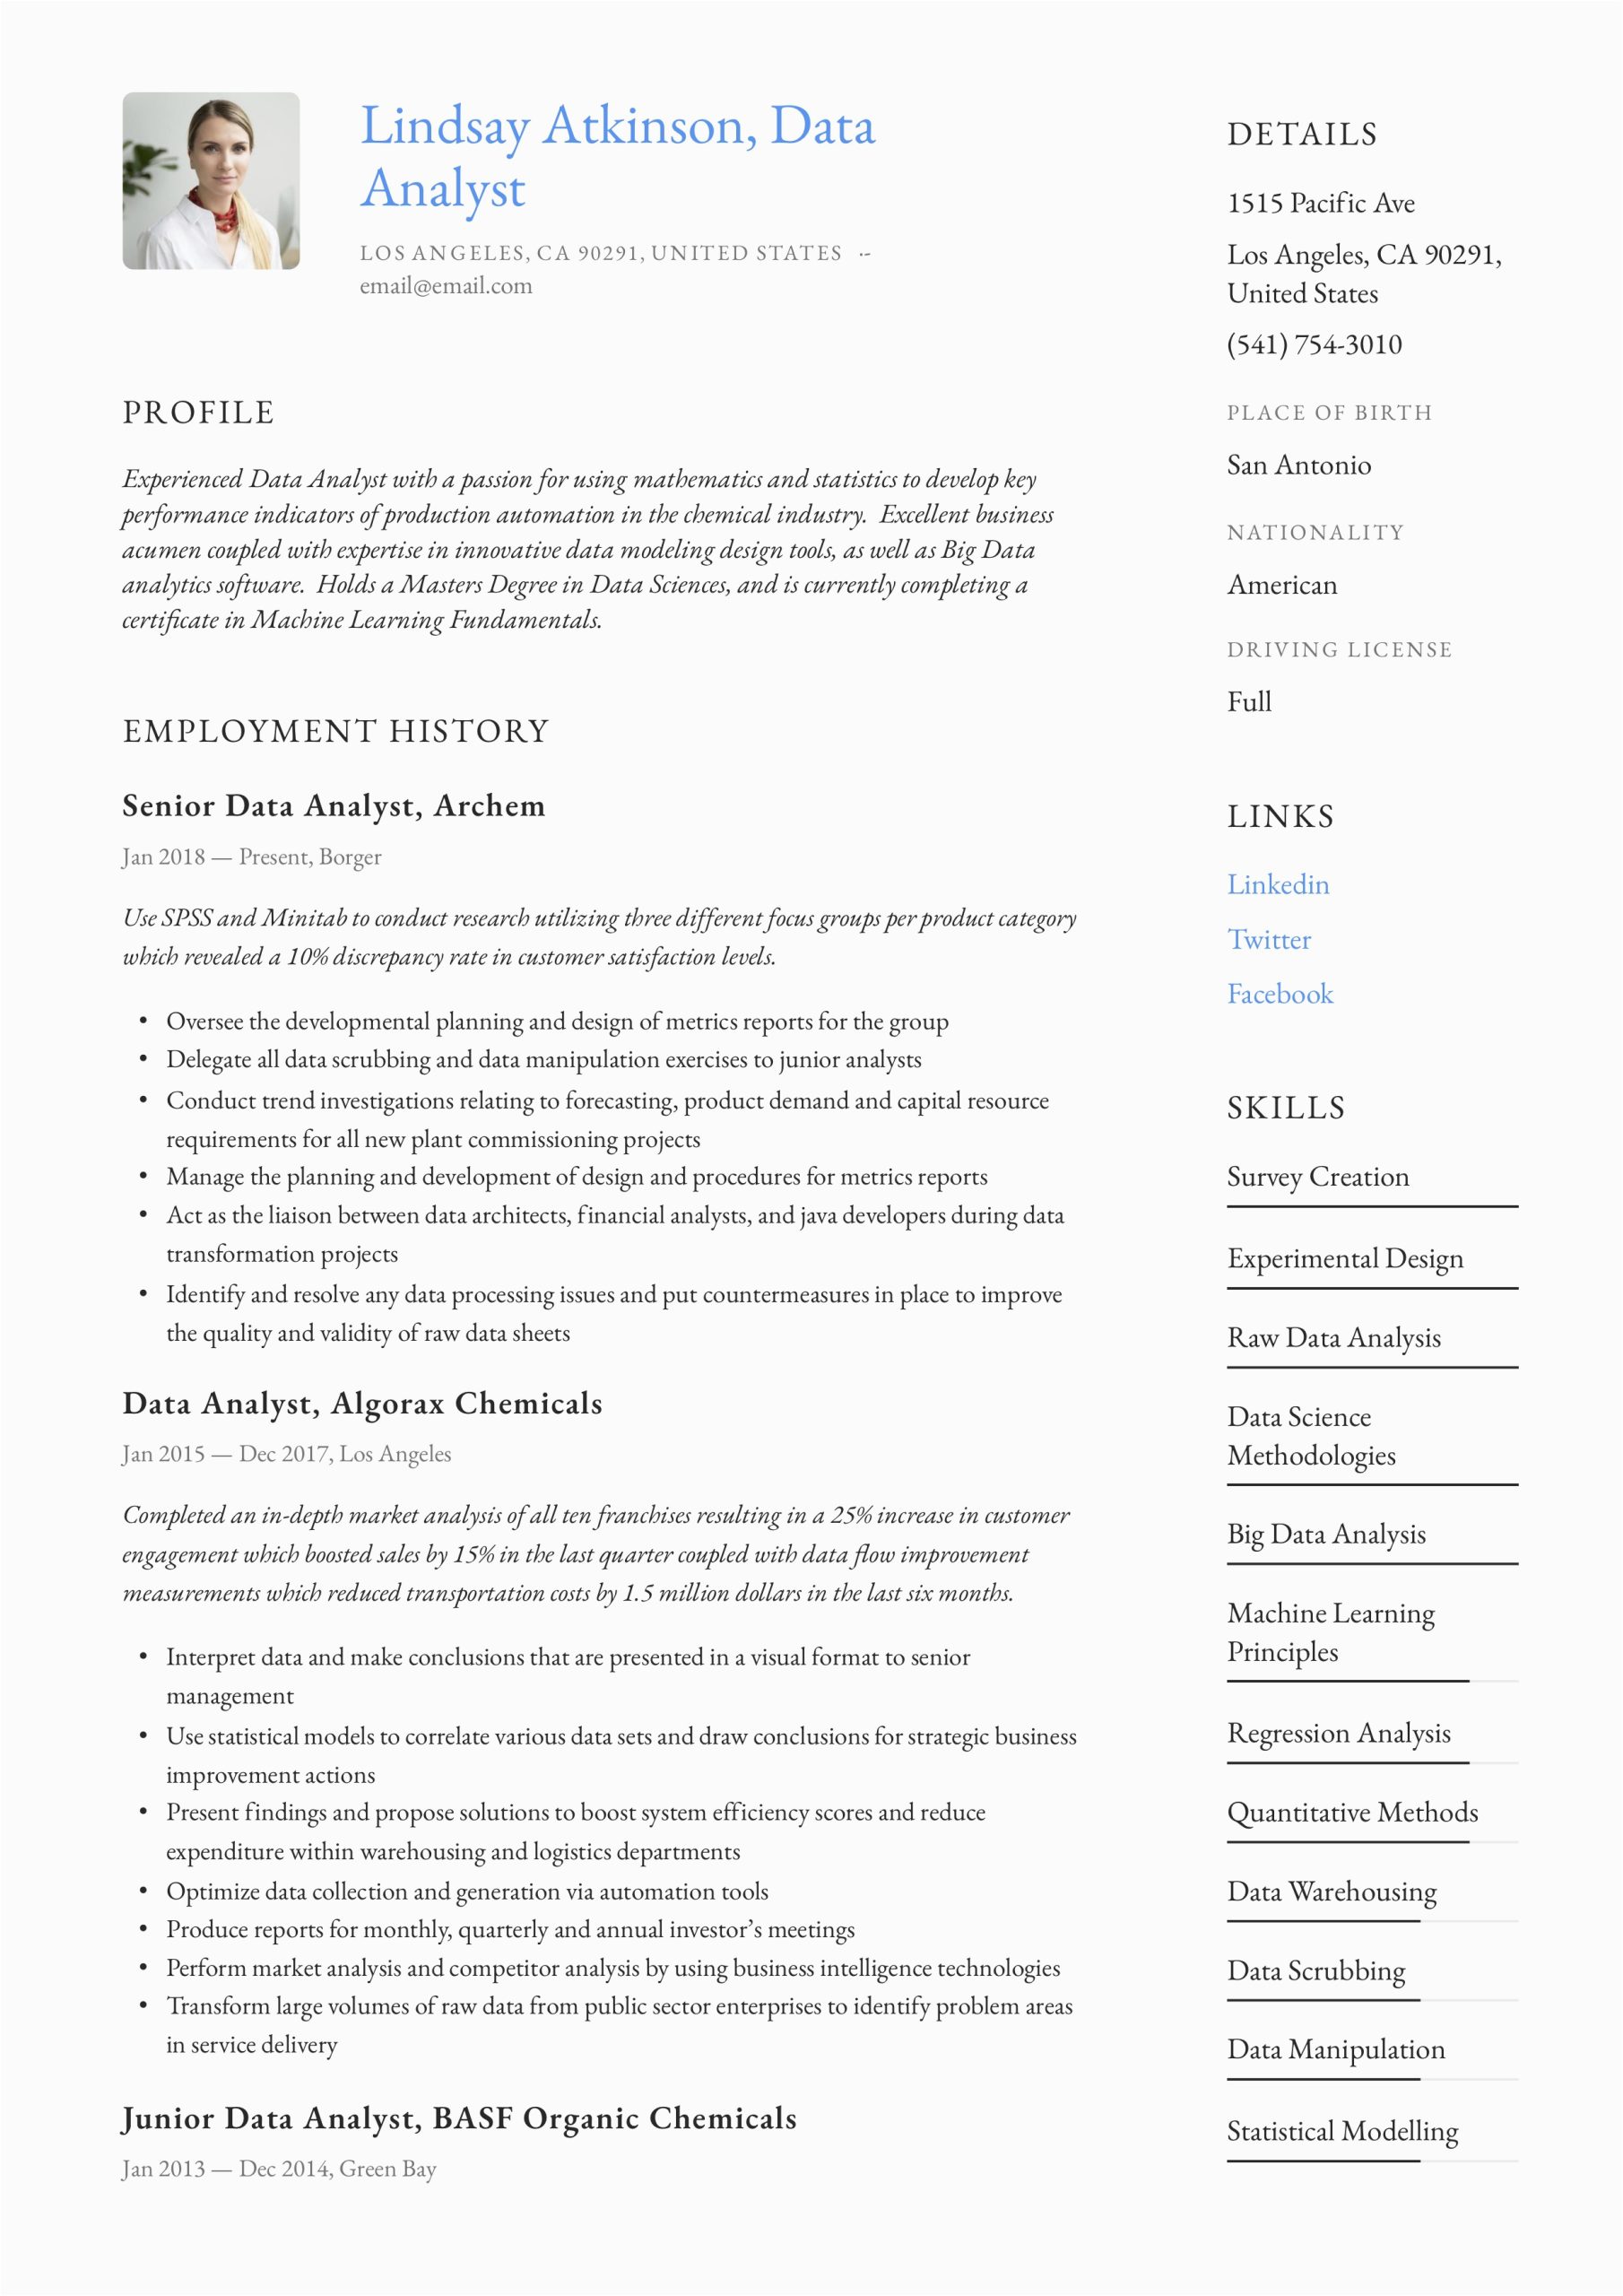 Data Analyst Information for Resume Sample Data Analyst Resume & Writing Guide 19 Examples